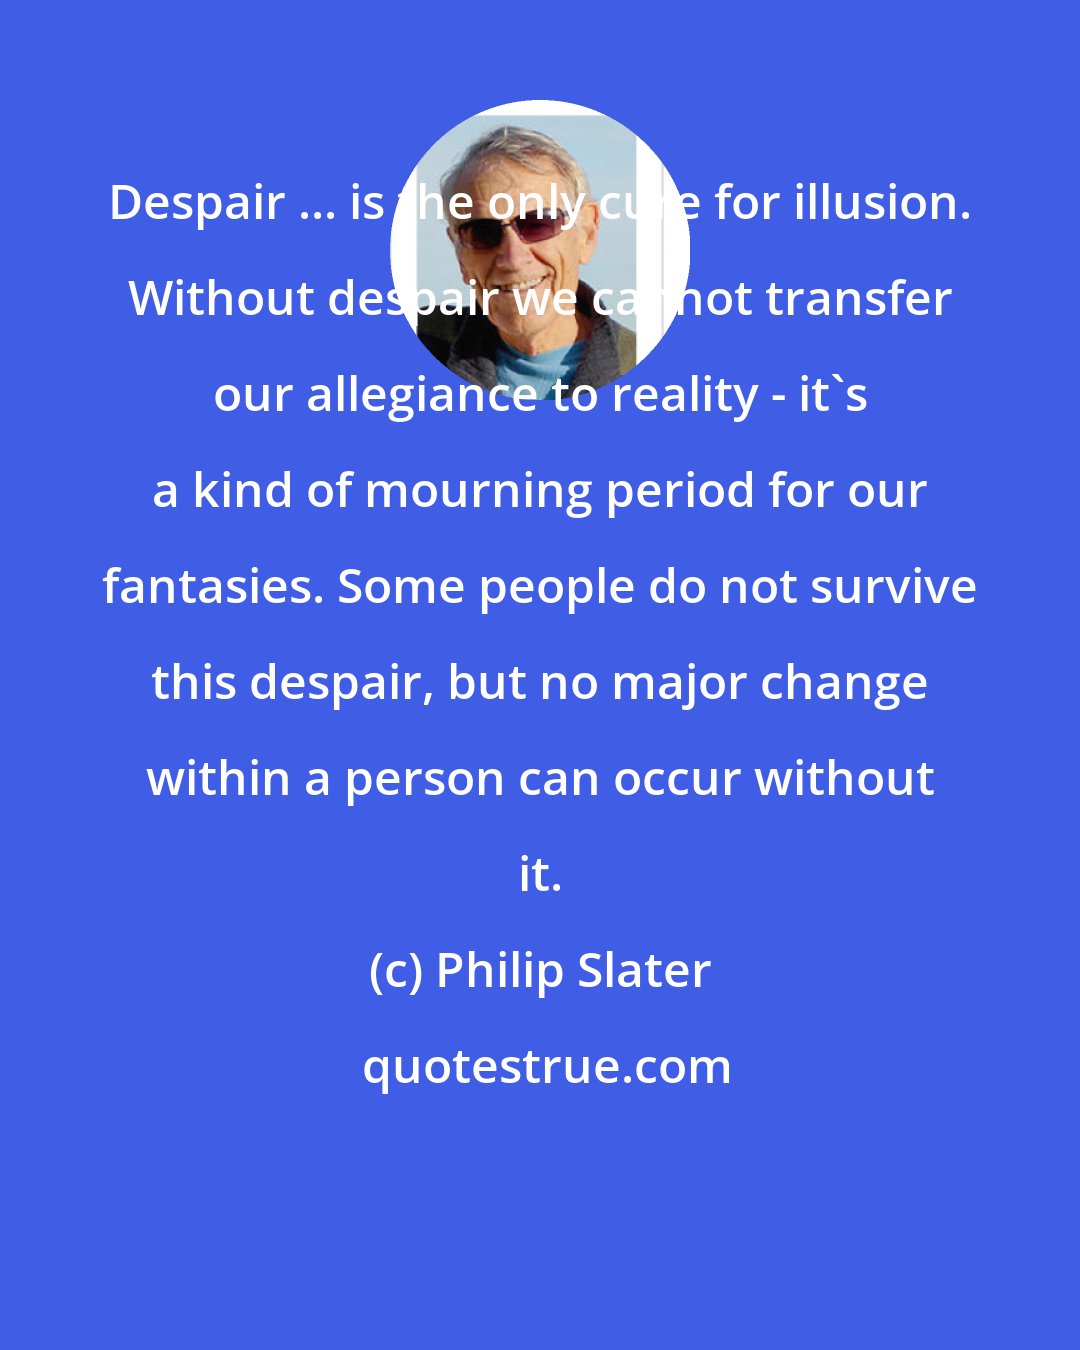 Philip Slater: Despair ... is the only cure for illusion. Without despair we cannot transfer our allegiance to reality - it's a kind of mourning period for our fantasies. Some people do not survive this despair, but no major change within a person can occur without it.